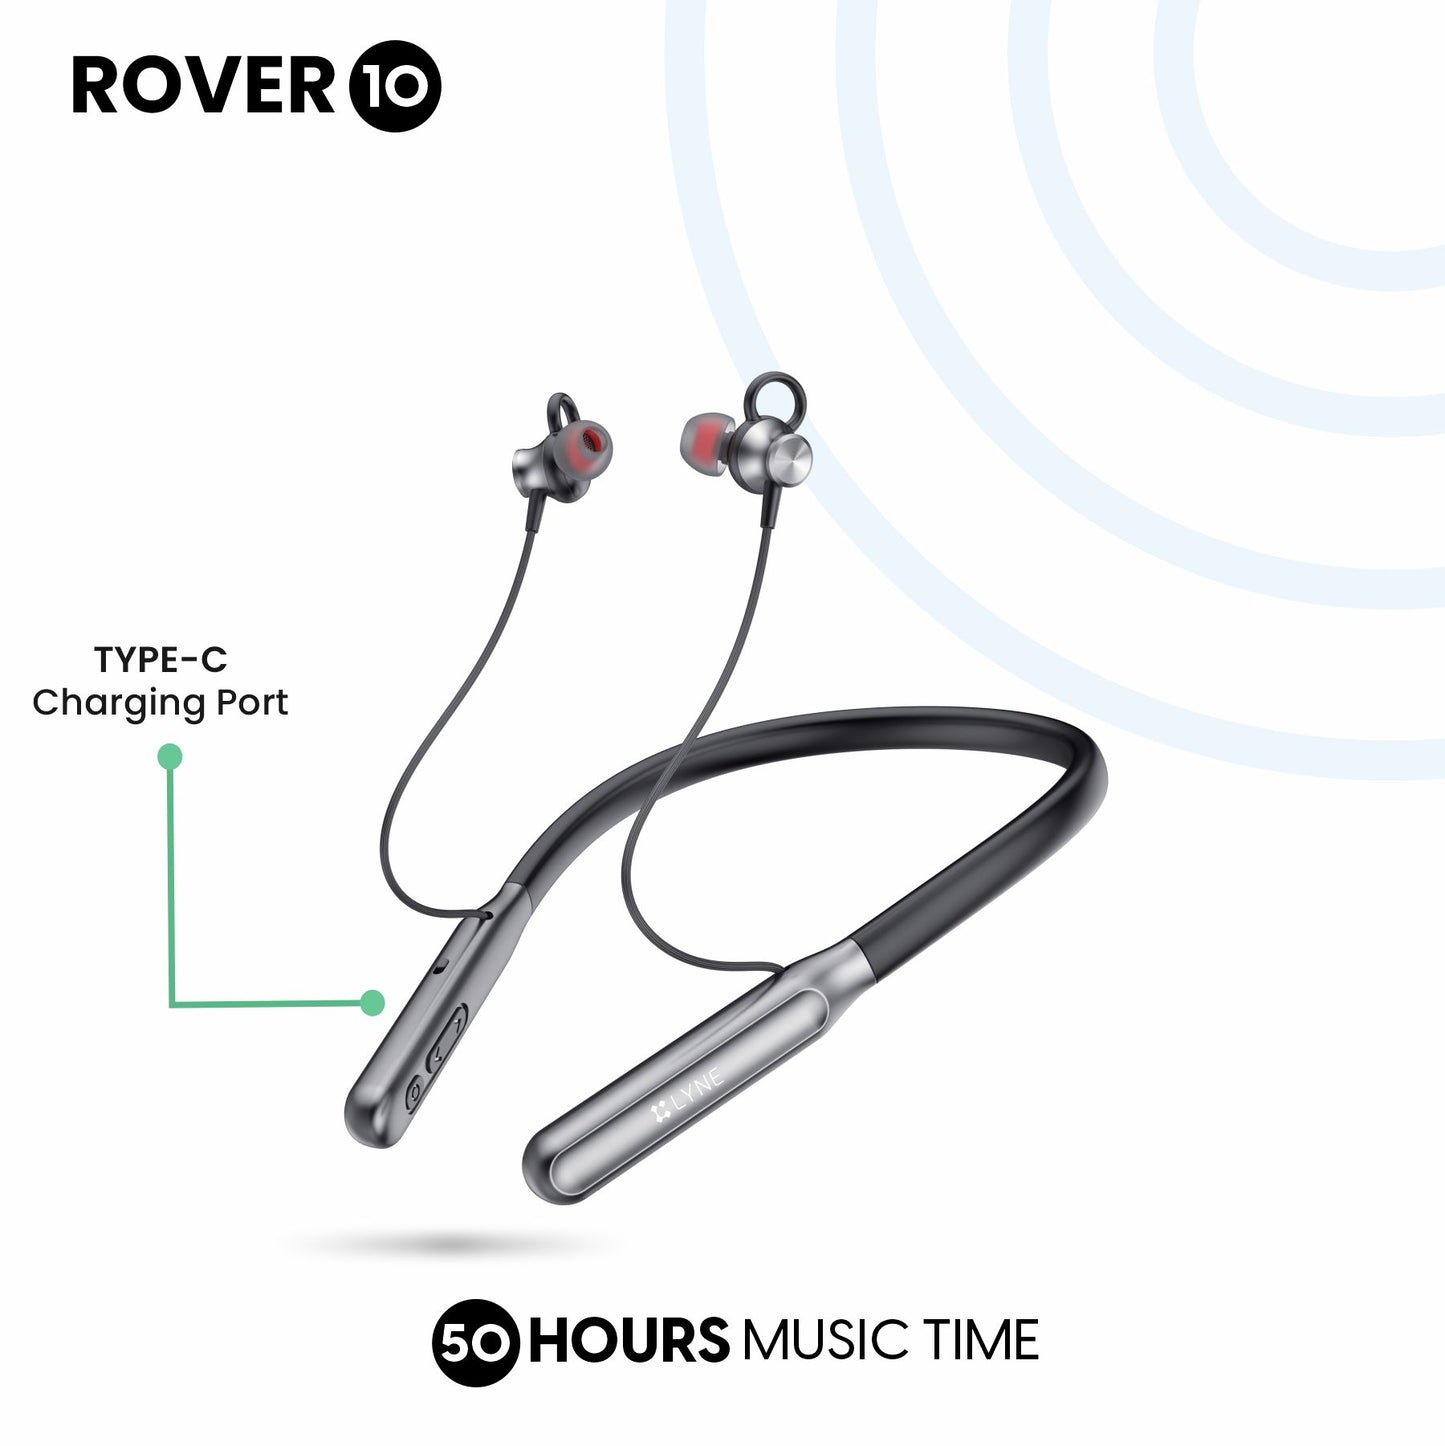 LYNE Rover 10 50 Hours Music Time Bluetooth Neckband with IPX5 Water Resistance, Magnetic Earbuds & Mic